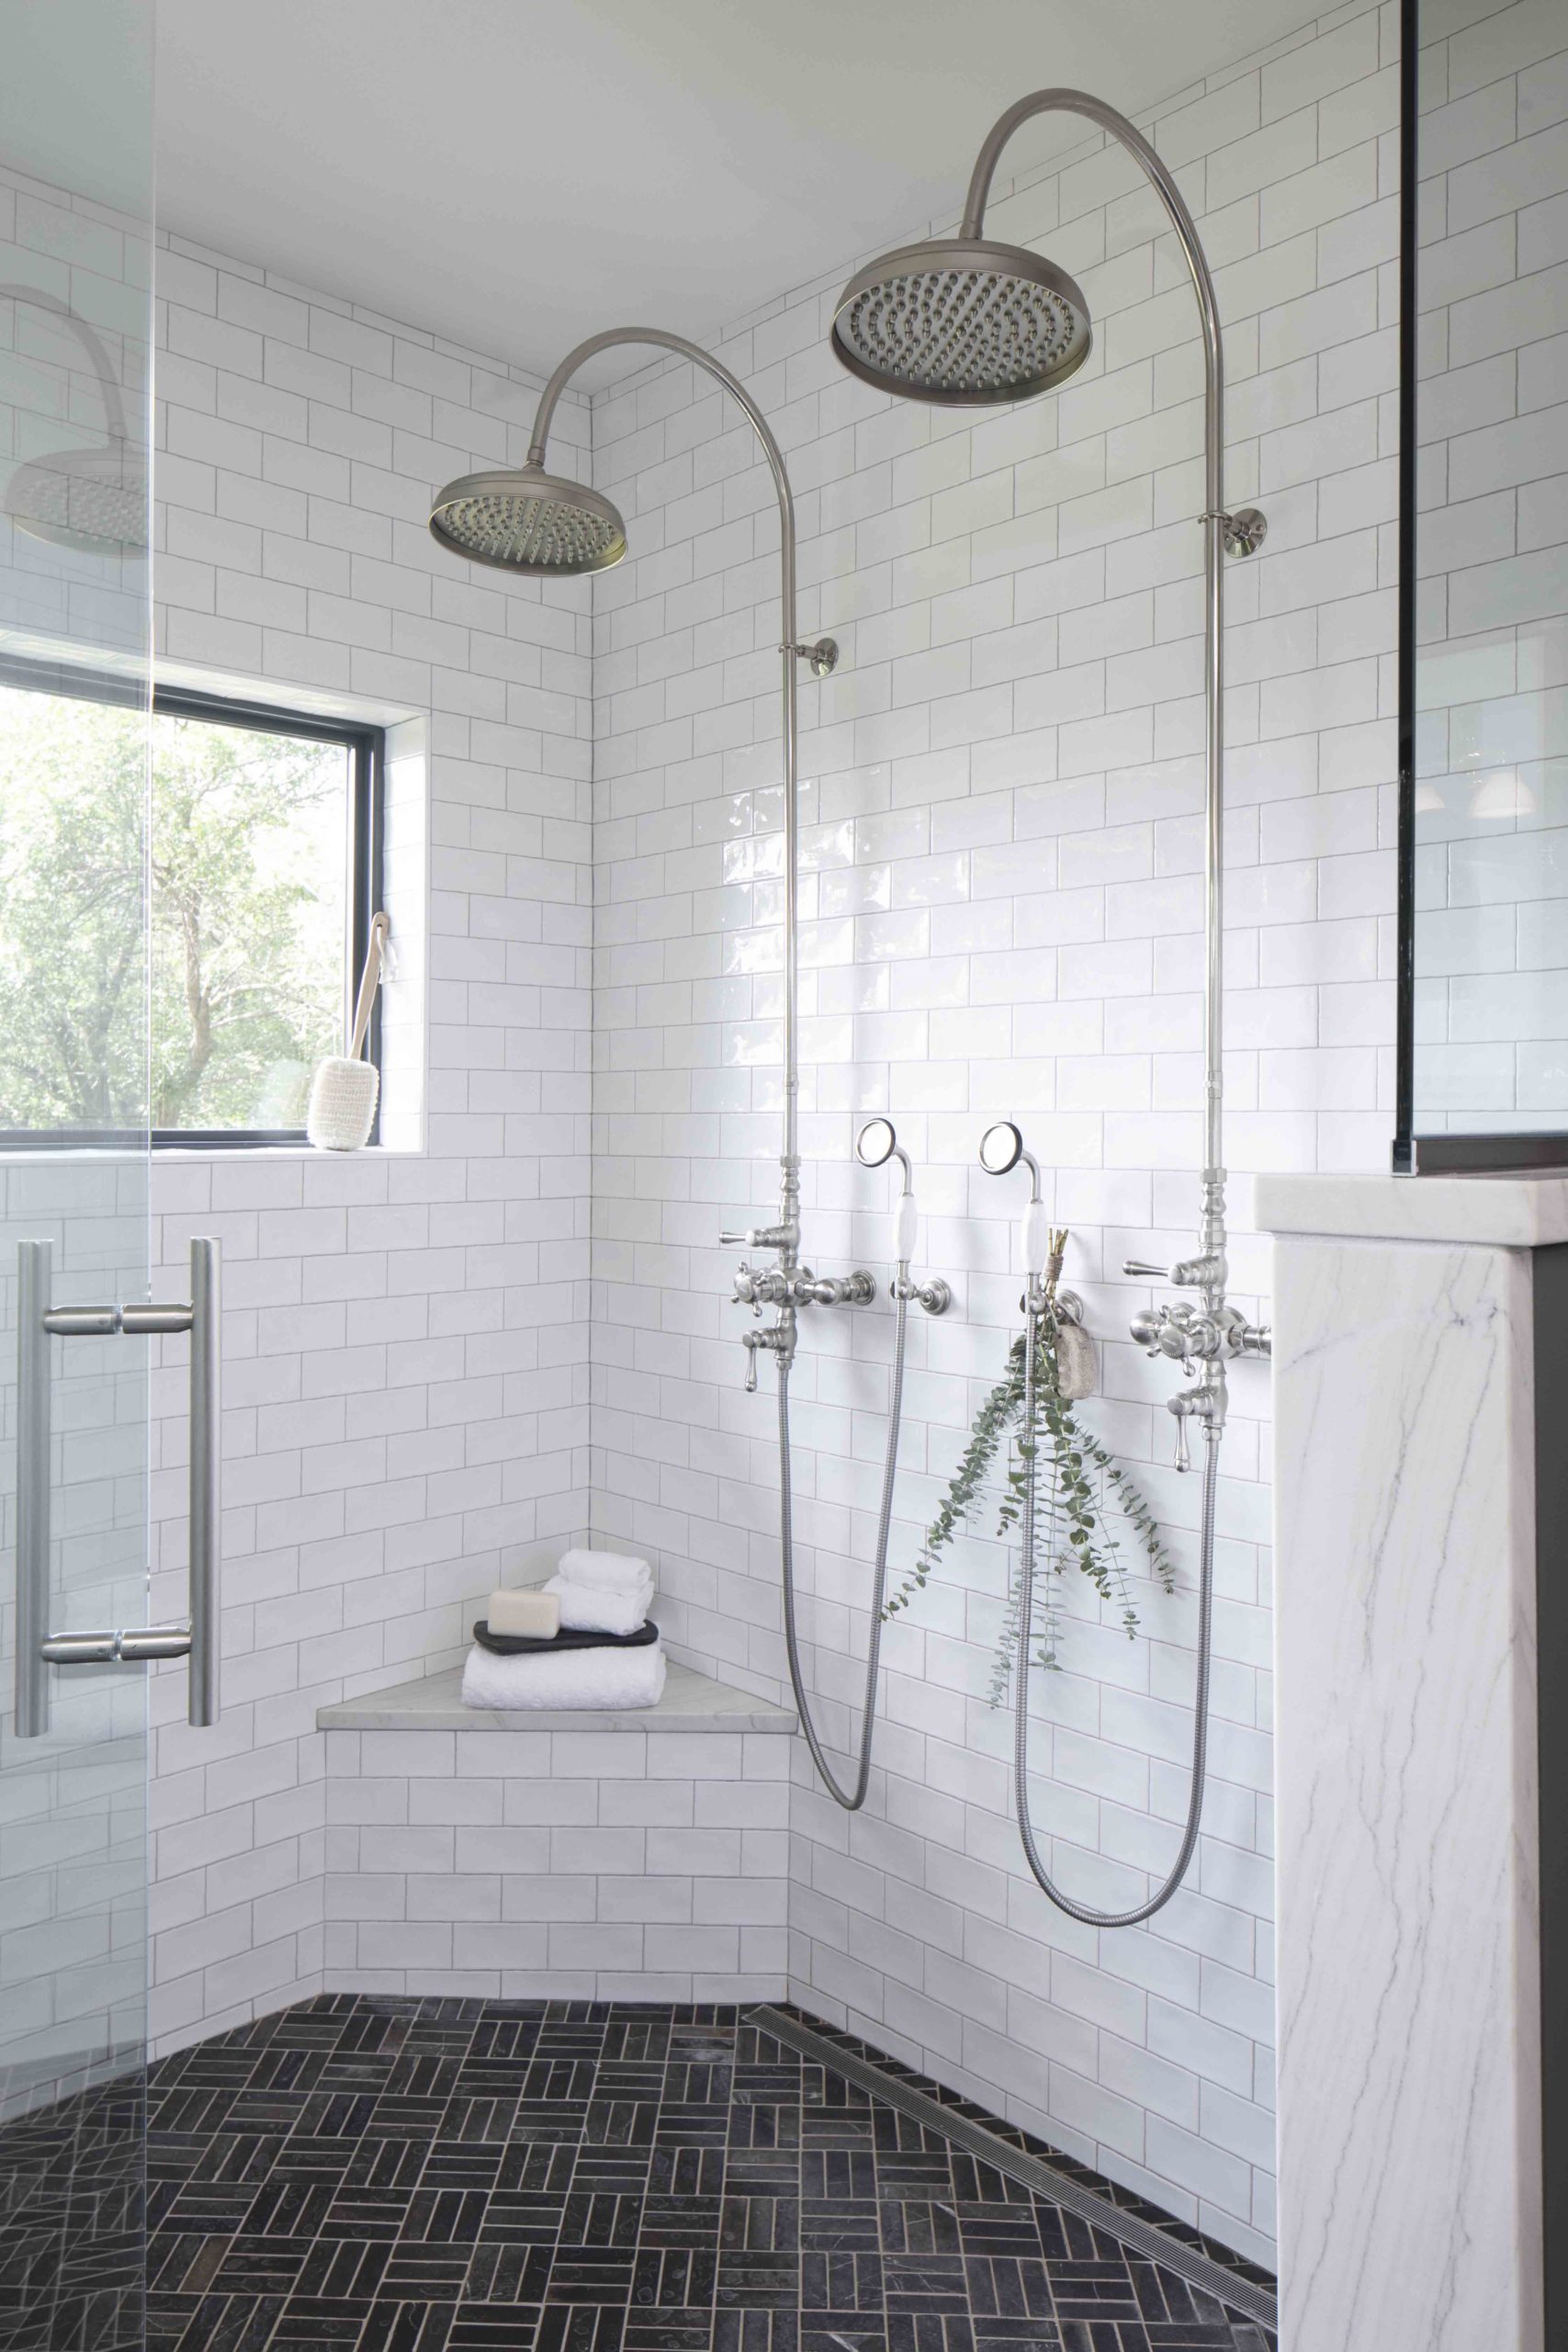 A white tiled bathroom with a glass shower stall in a prairie transitional custom home.